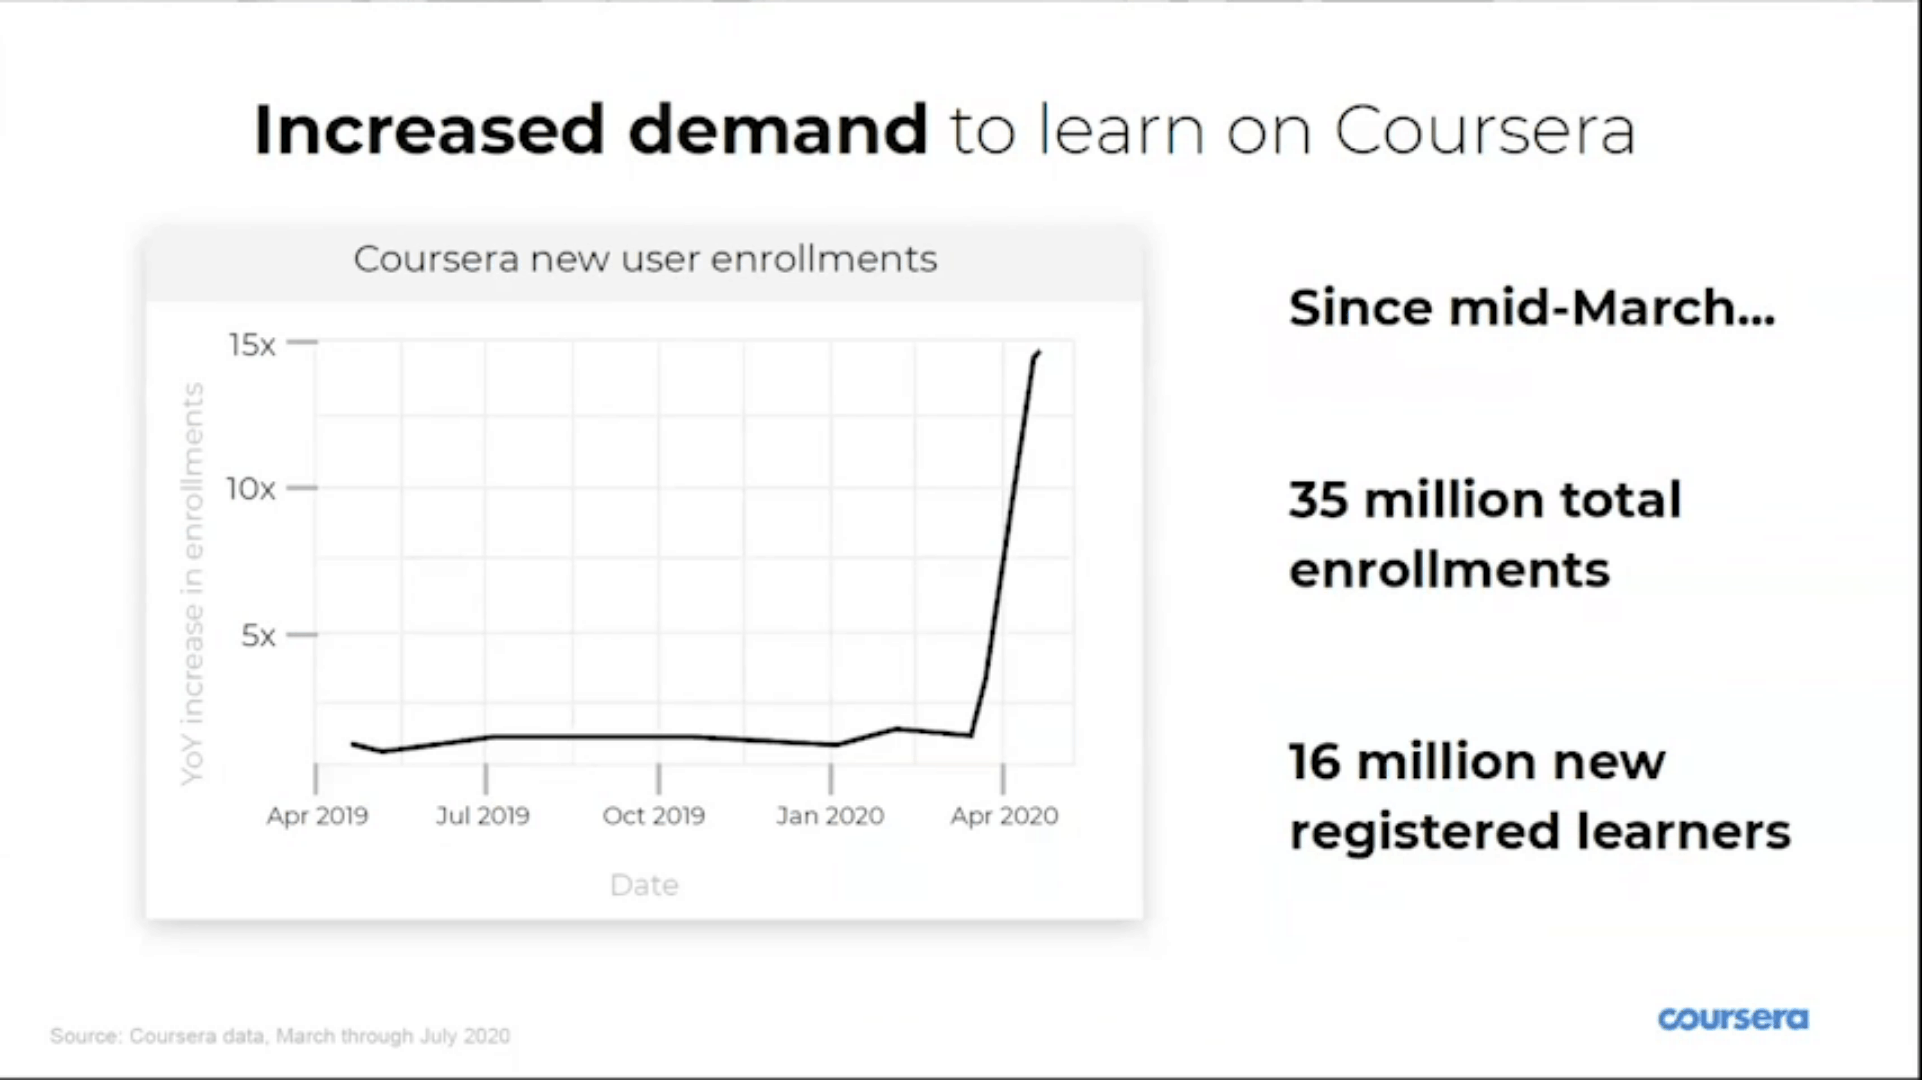 Coursera Learner Stats During the Pandemic. 16 million new users, 35 million enrollments